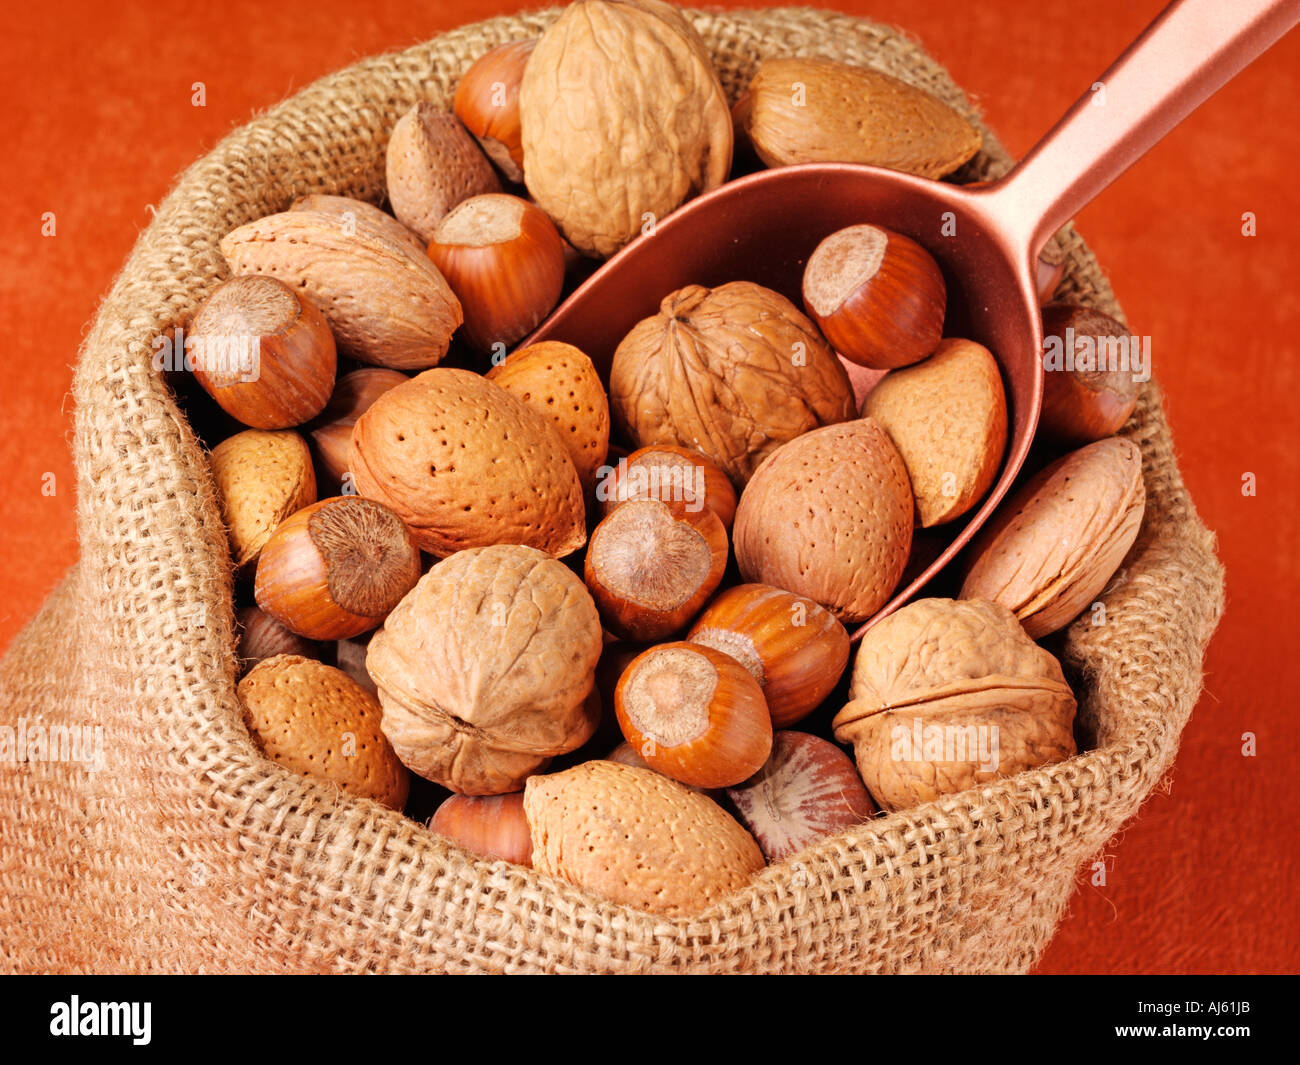 SACK OF MIXED NUTS Stock Photo